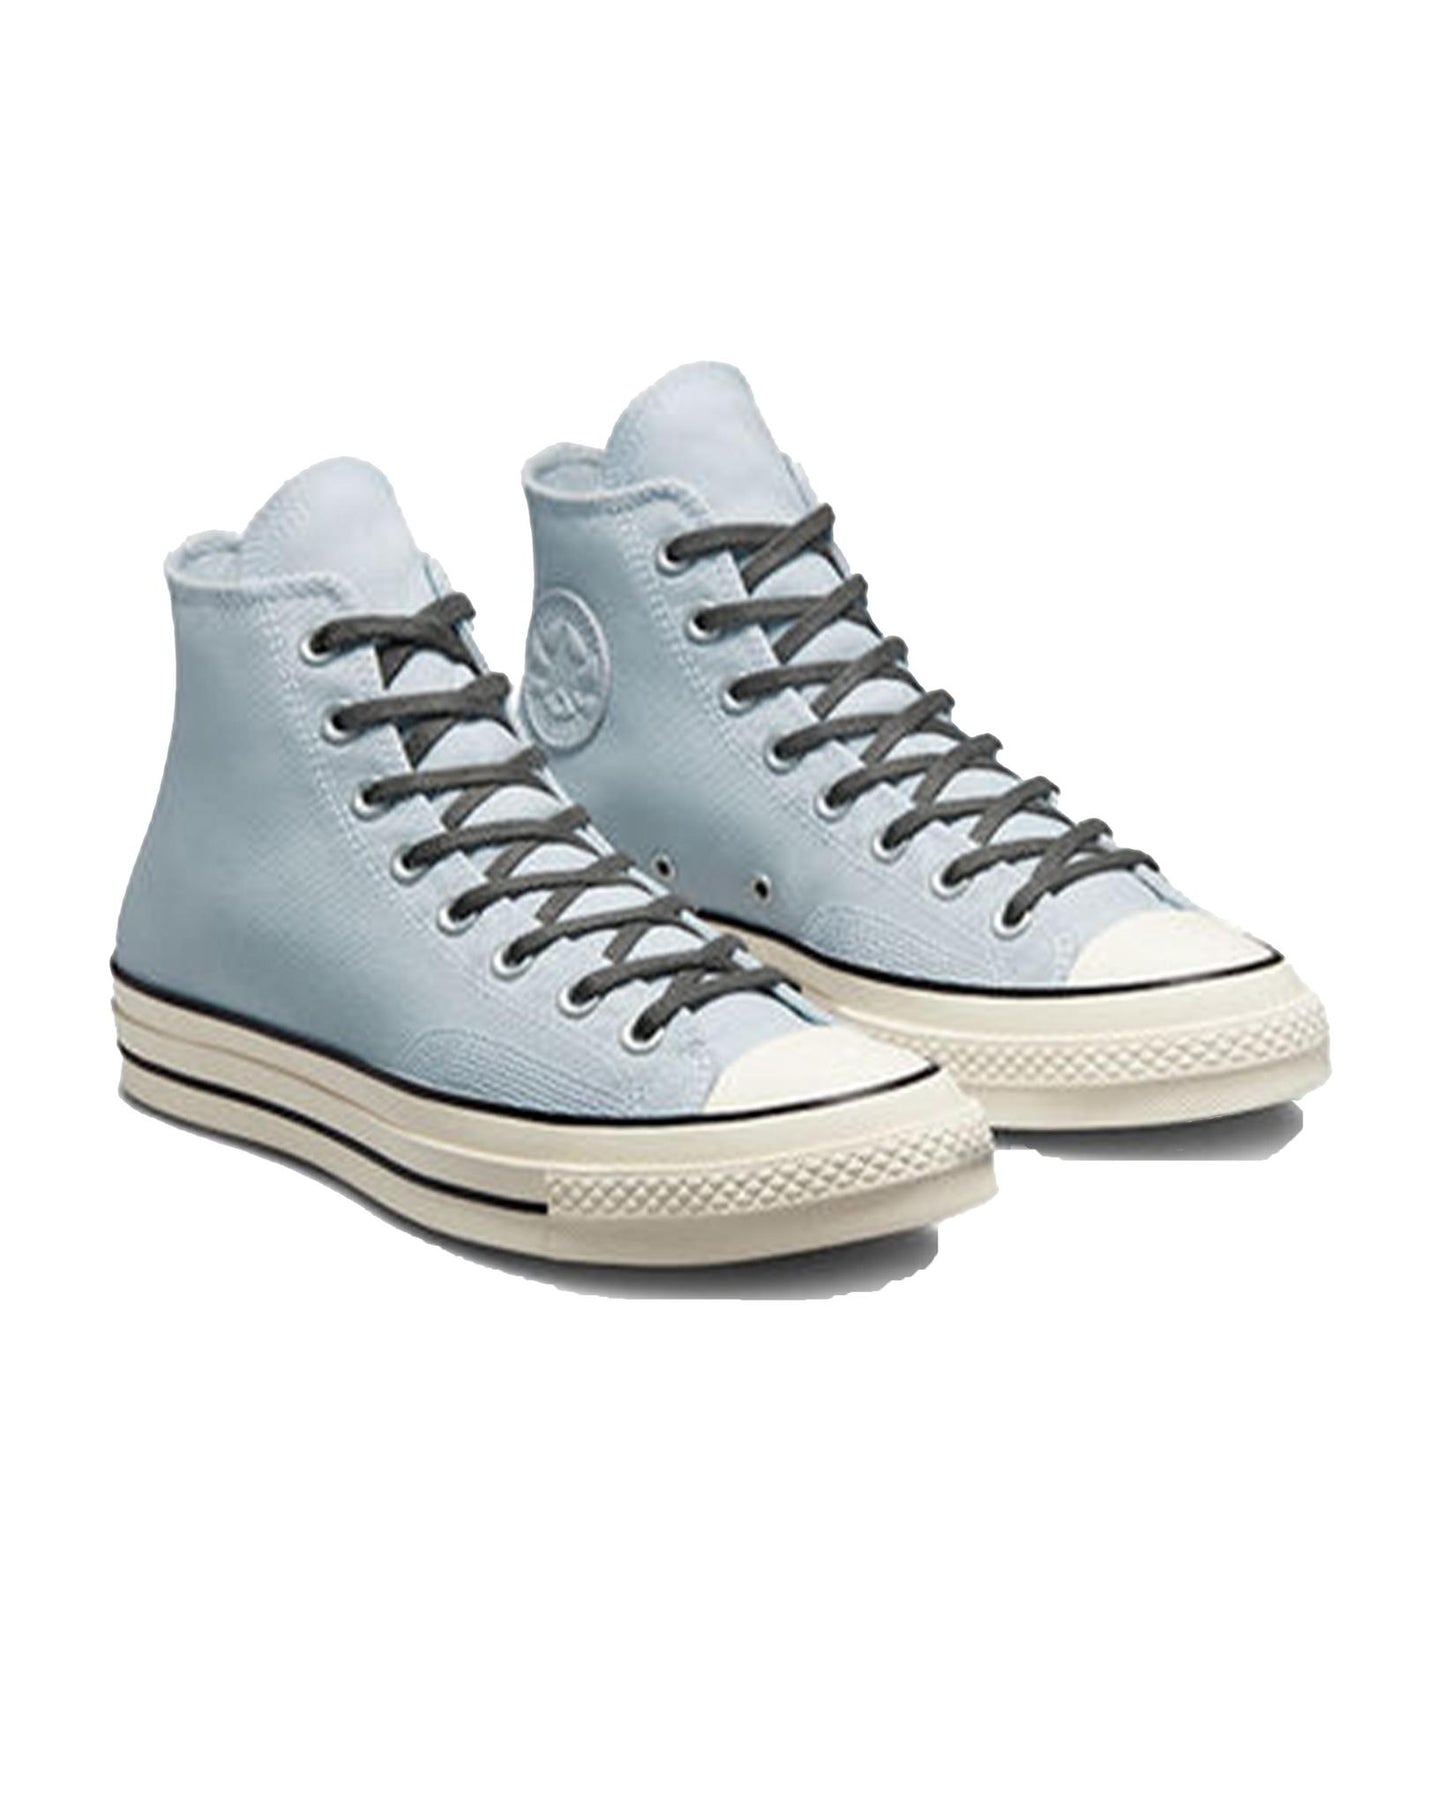 Converse Chuck 70 Hi Ghosted/Cyber Grey/White | STASHED